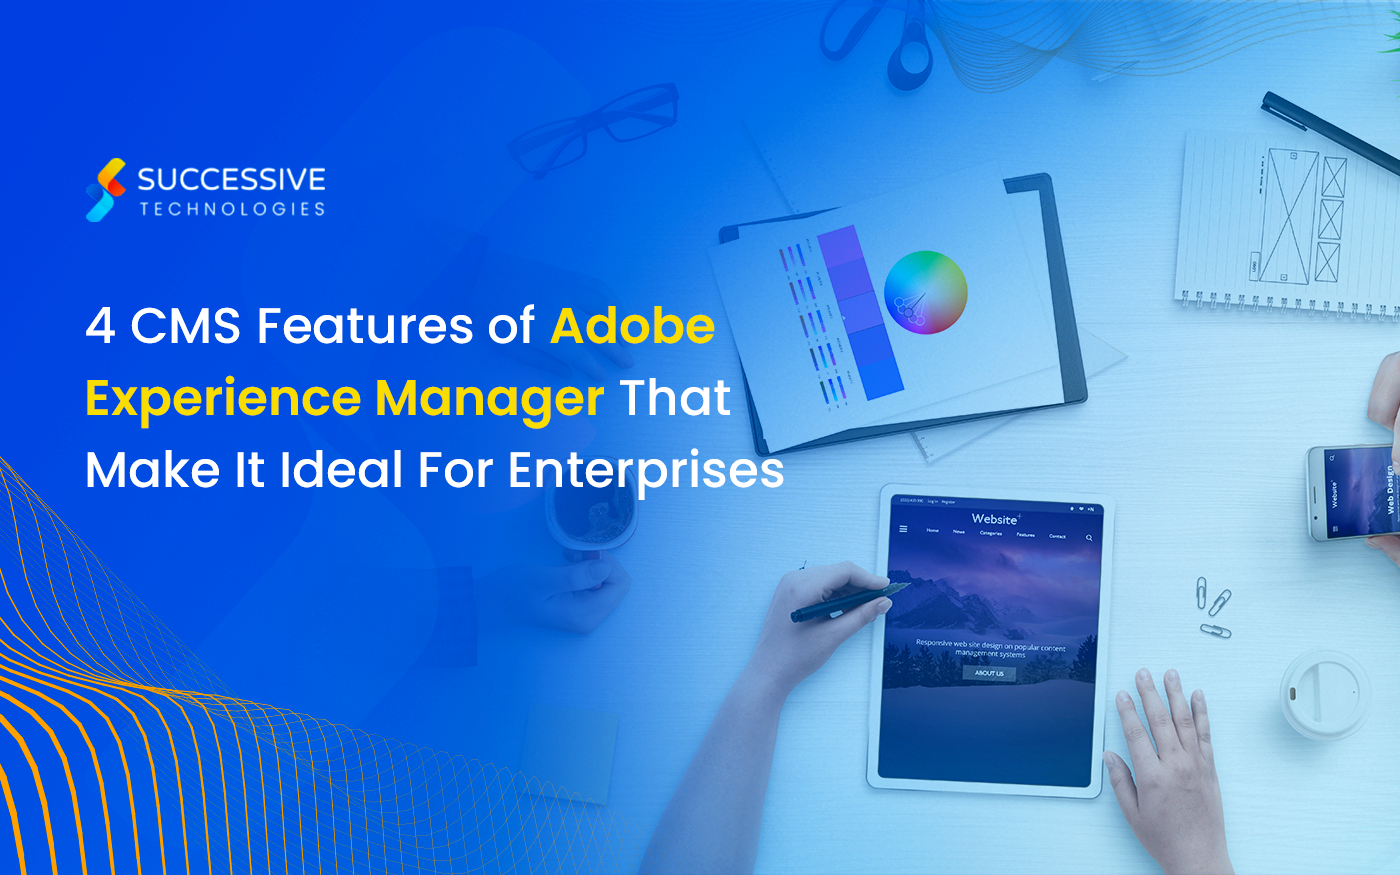 4 CMS Features of Adobe Experience Manager That Make It Ideal For Enterprises